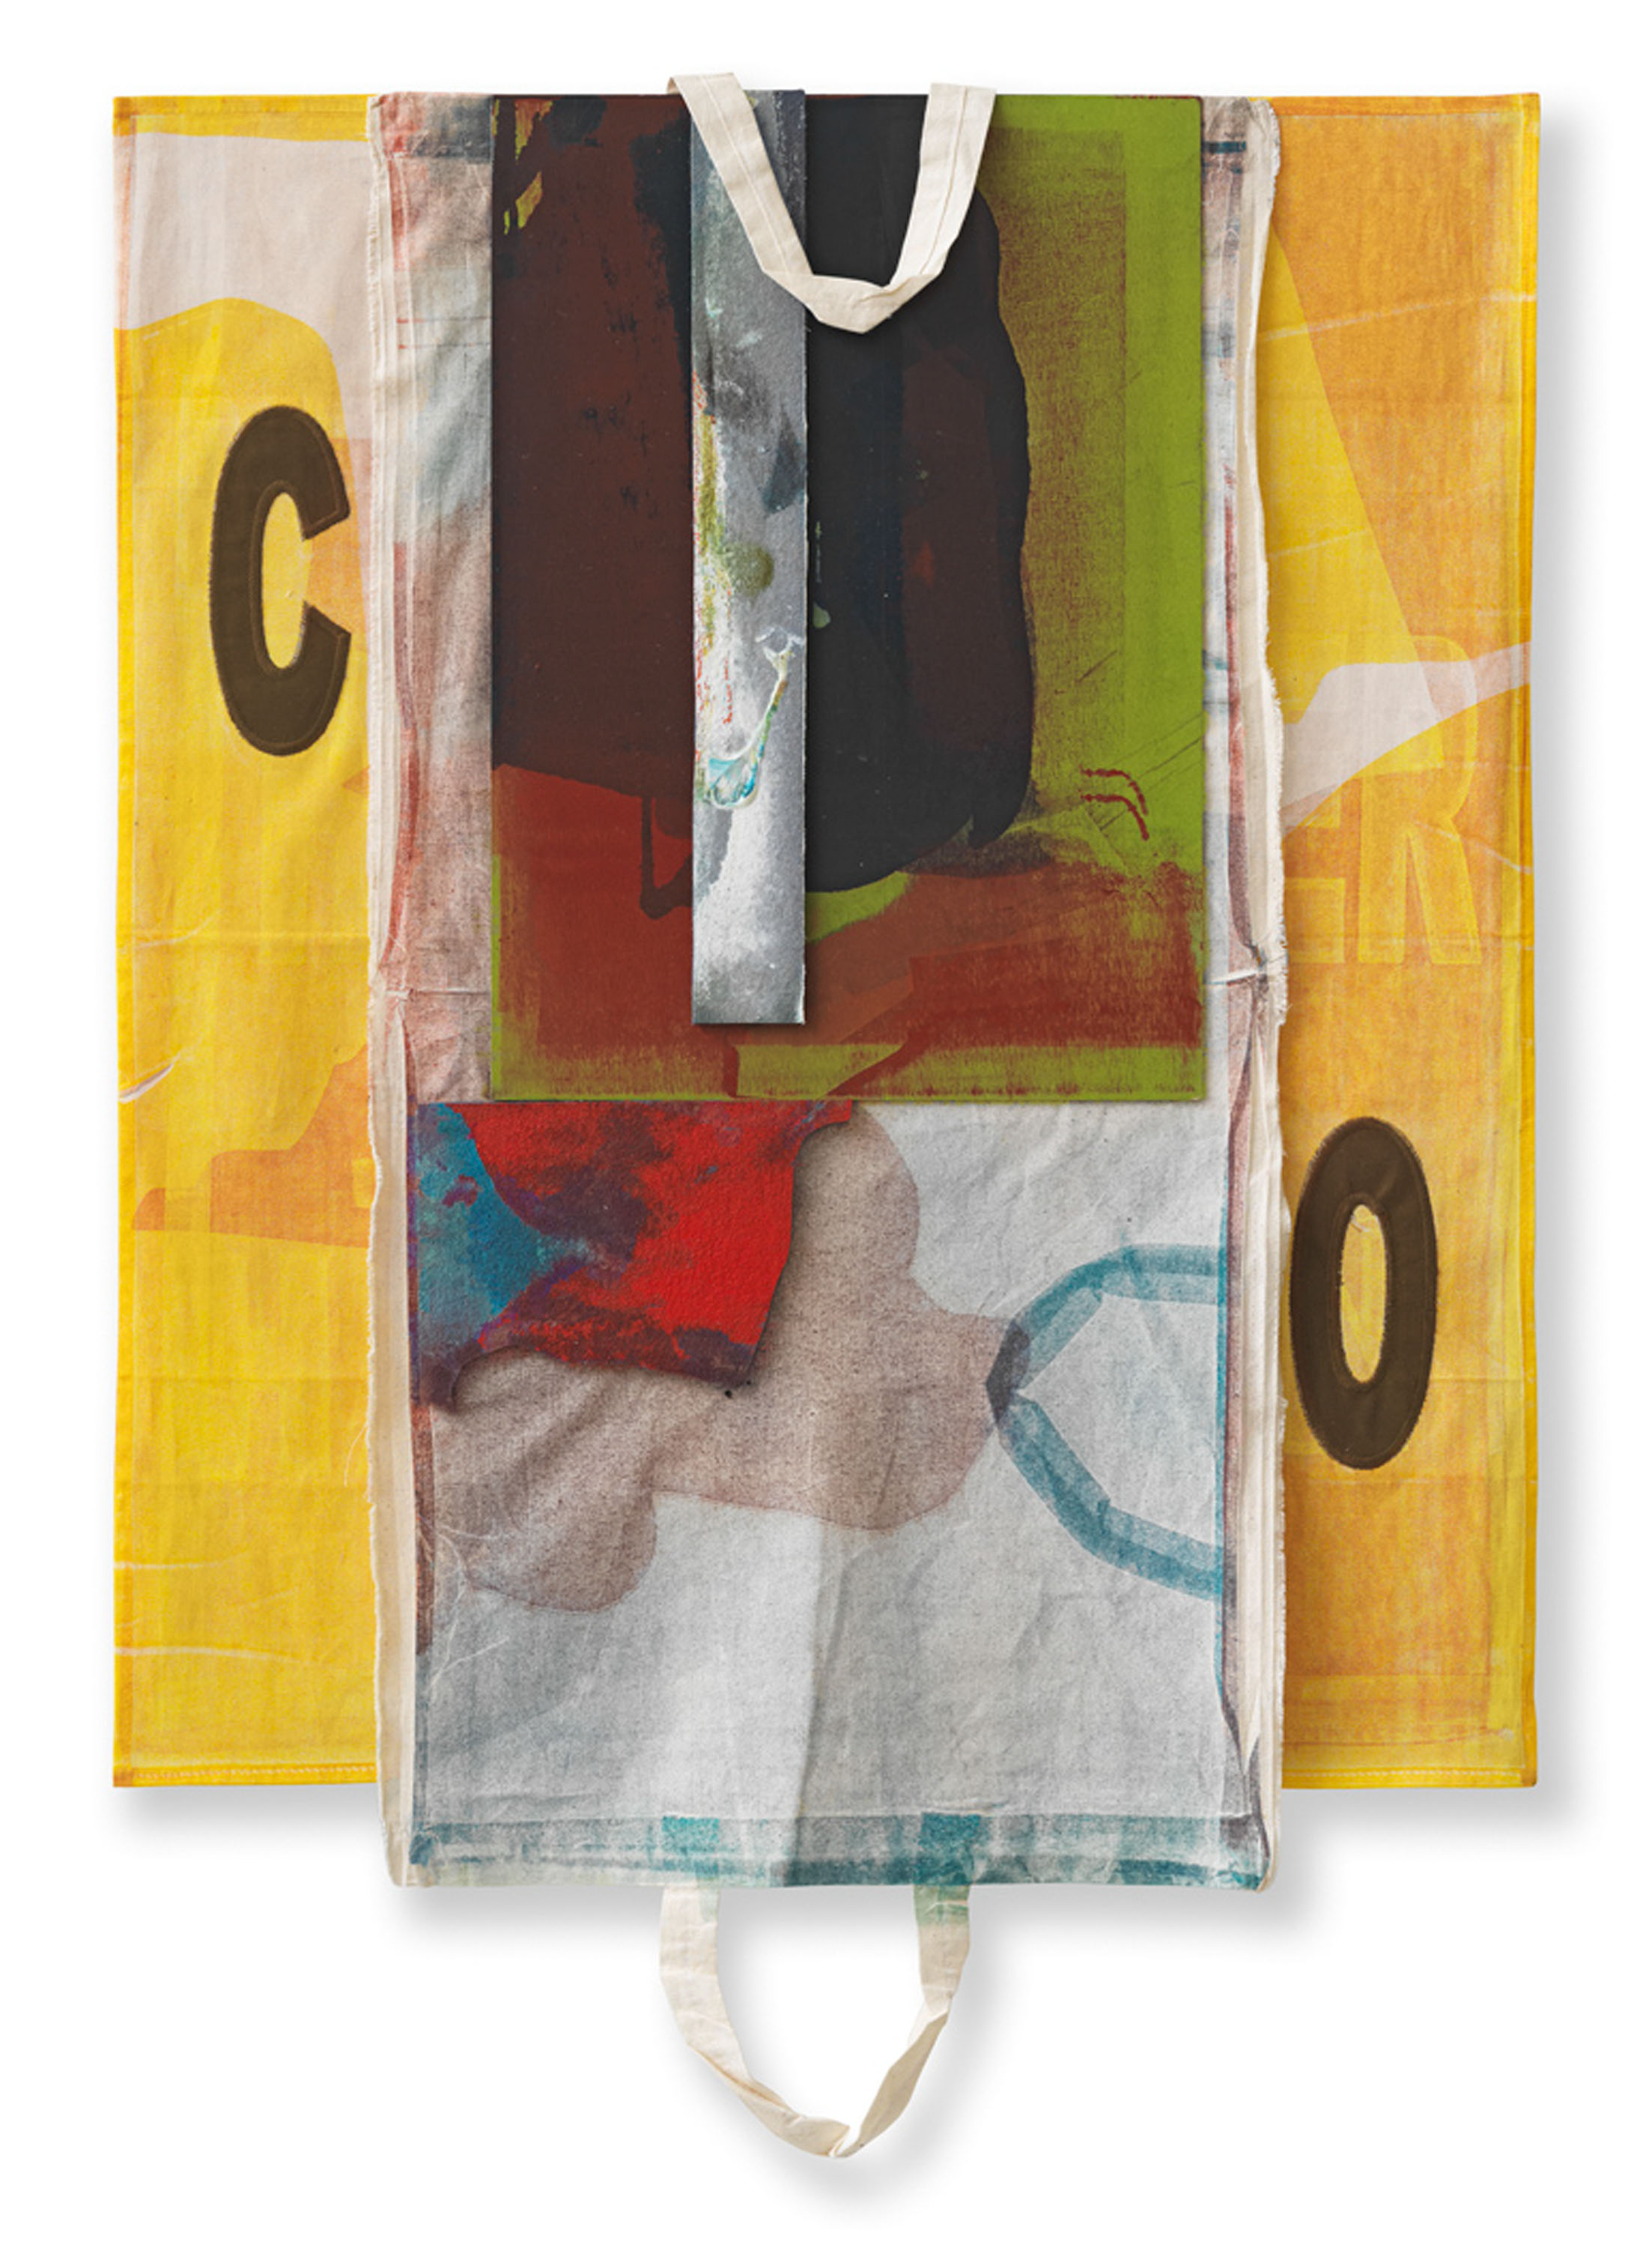 Untitled (CO Yellow), 2014